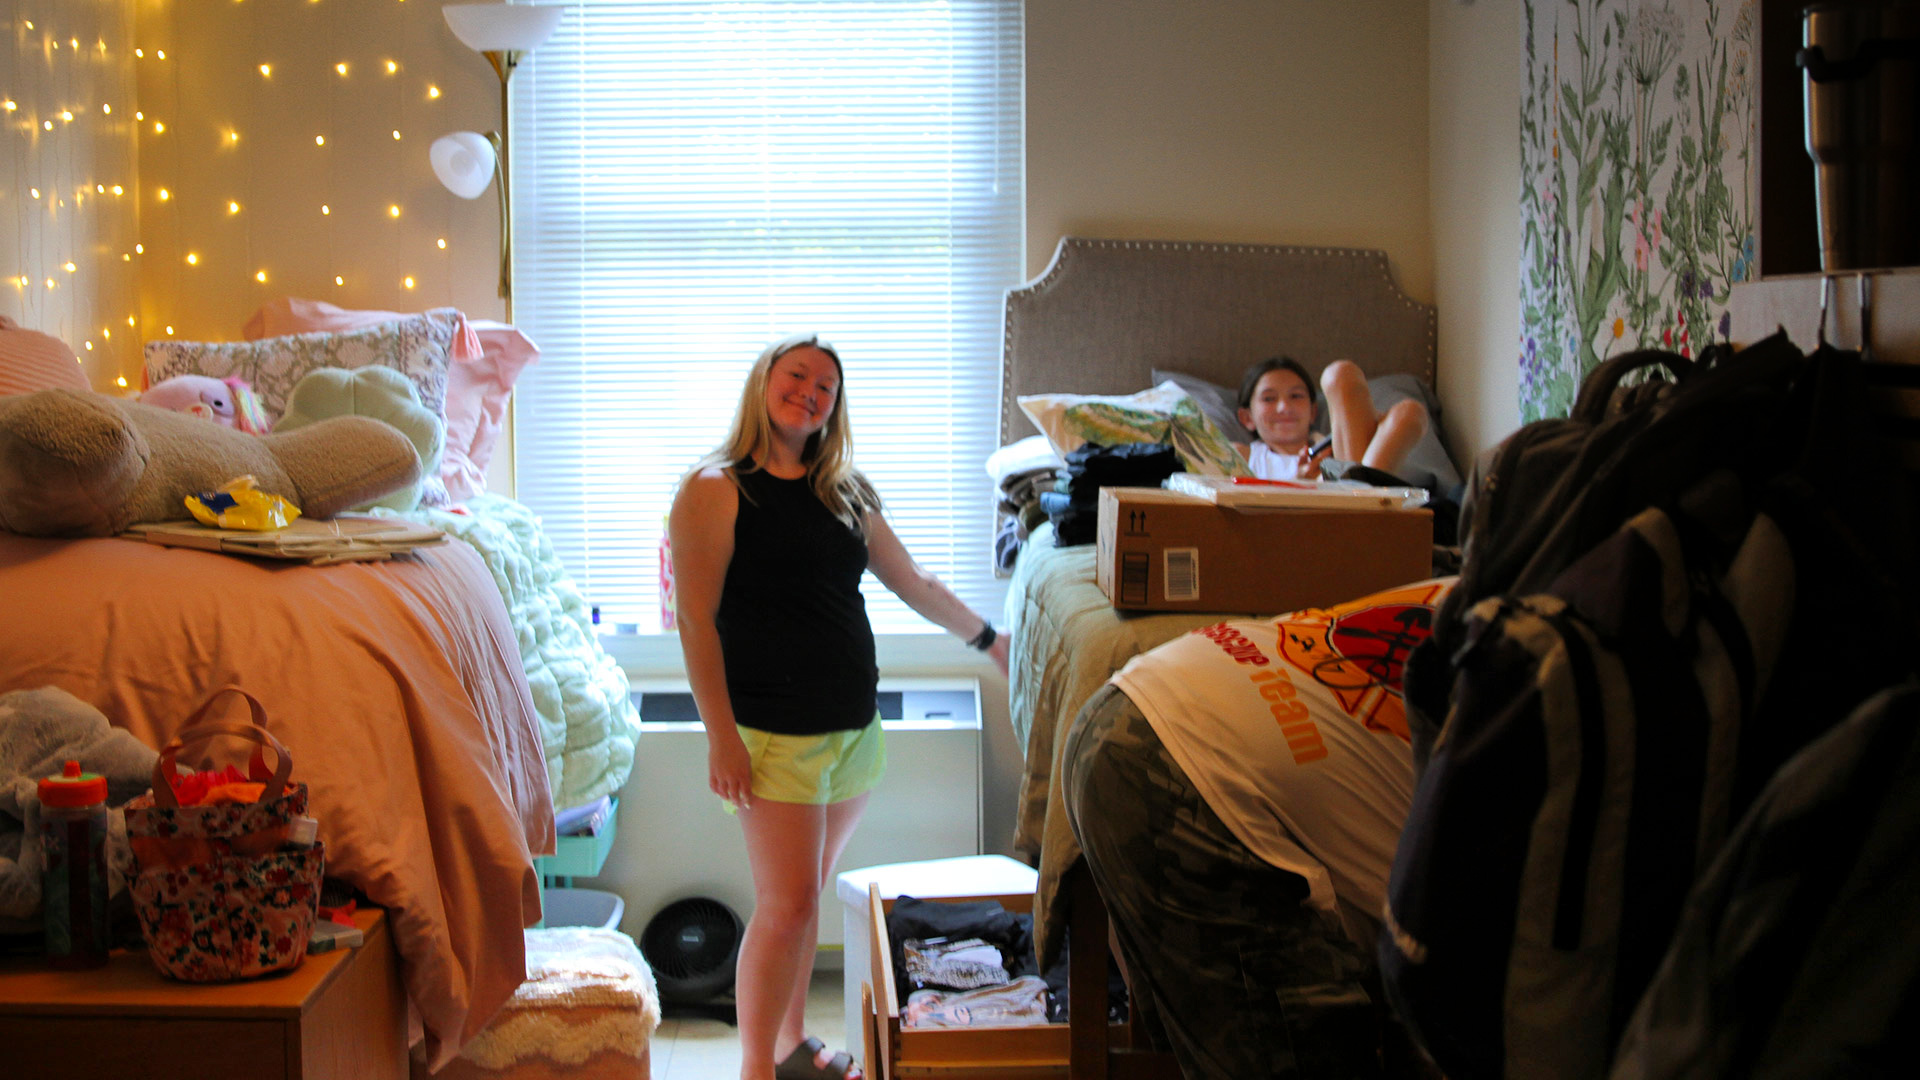 A student stands between two beds in a residence hall and smiles at the camera, while their roommates smiles from their bed.